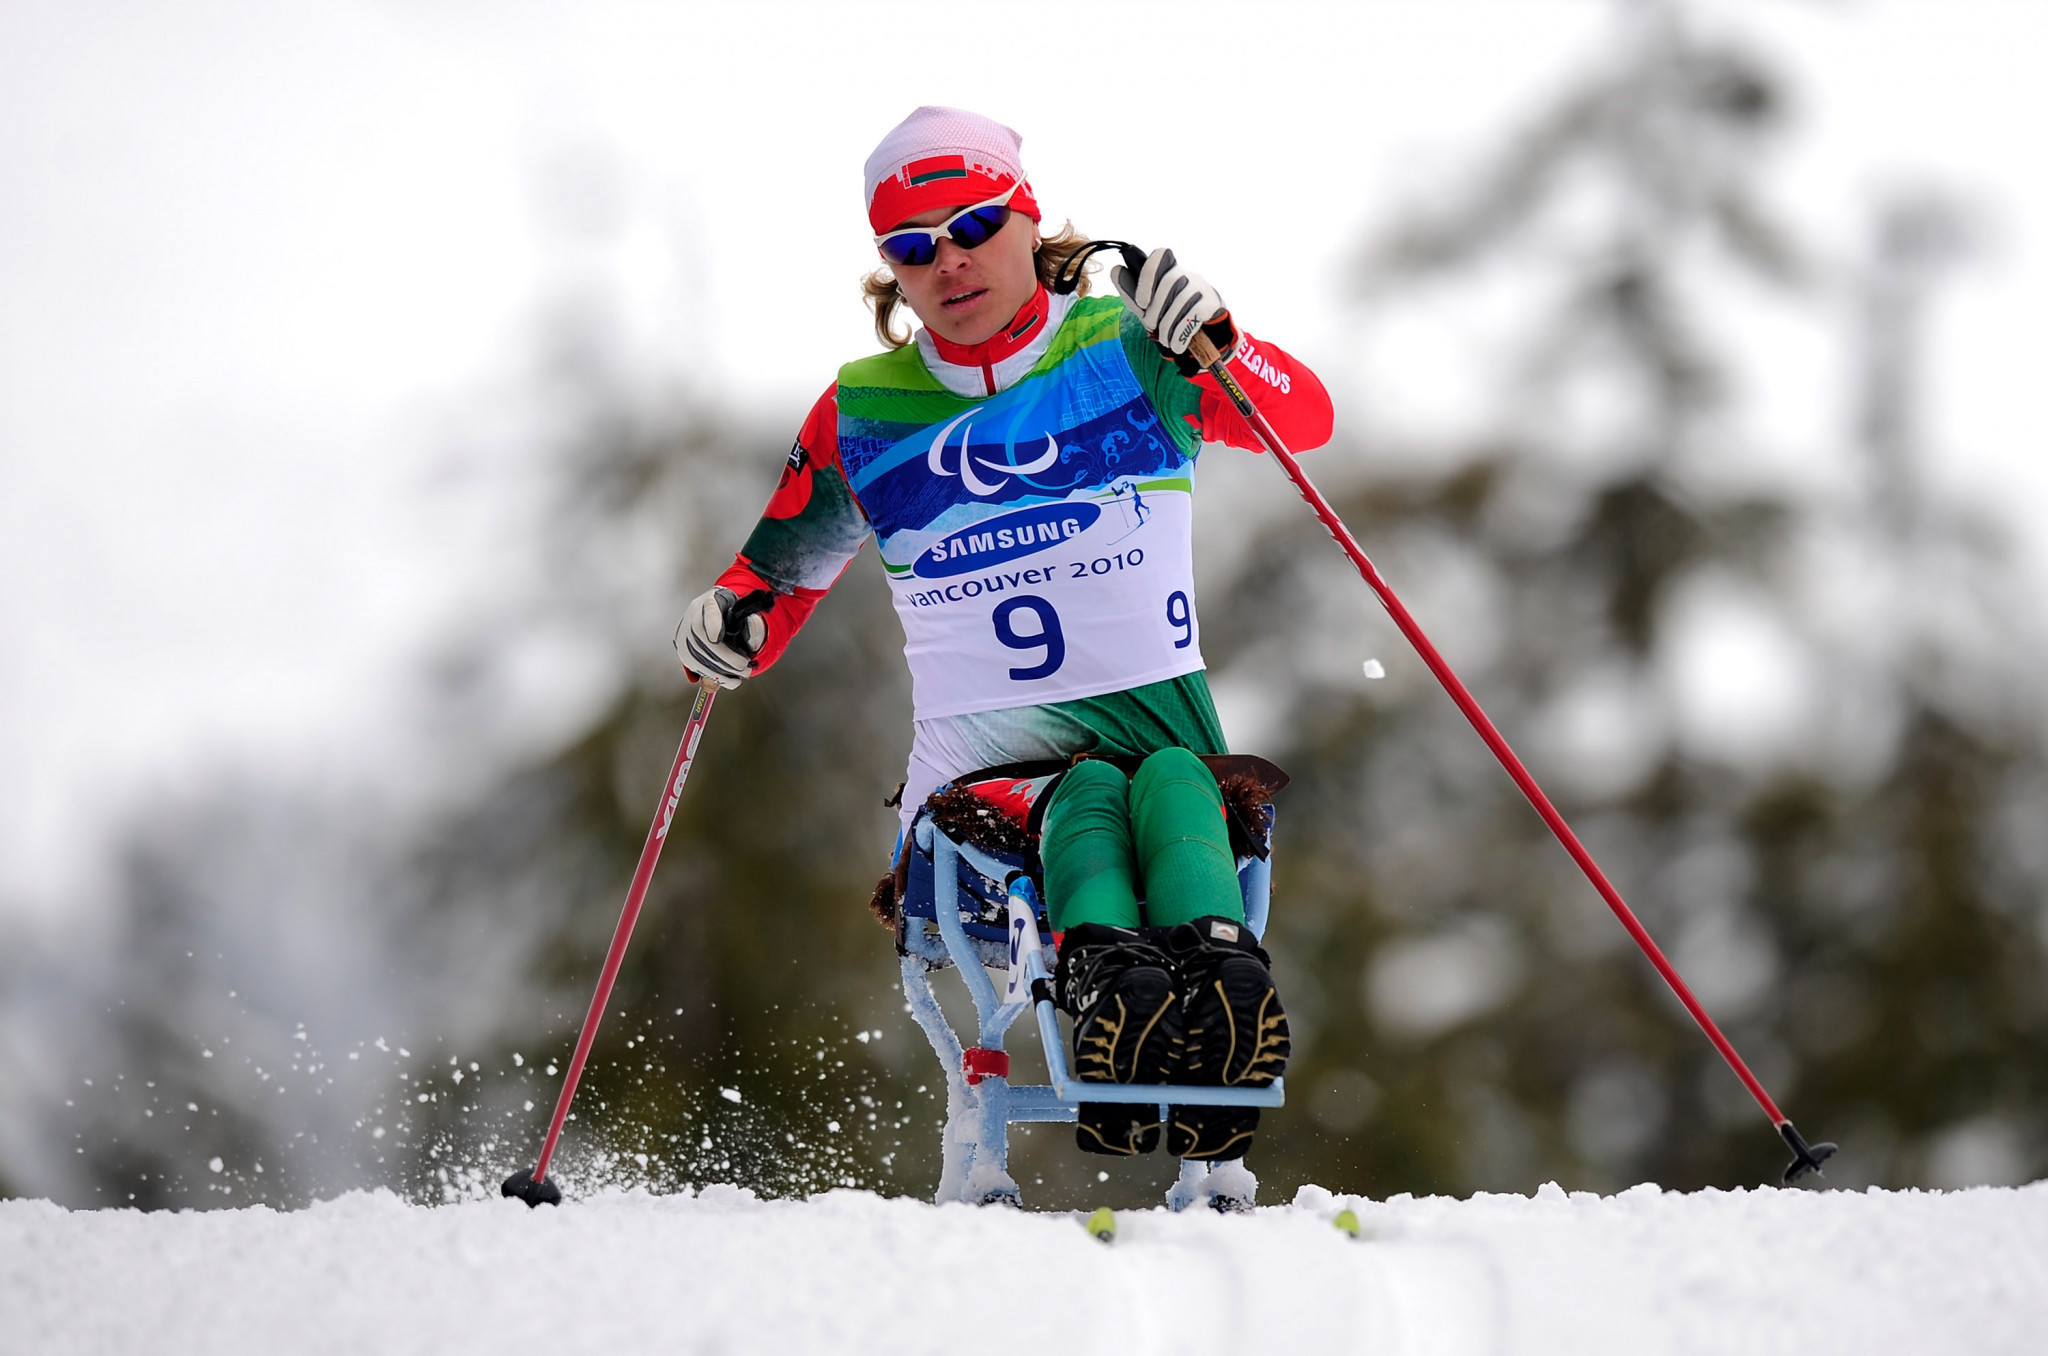 Multiple Paralympic medallist Vauchok to carry Belarus flag at Opening Ceremony of Pyeongchang 2018